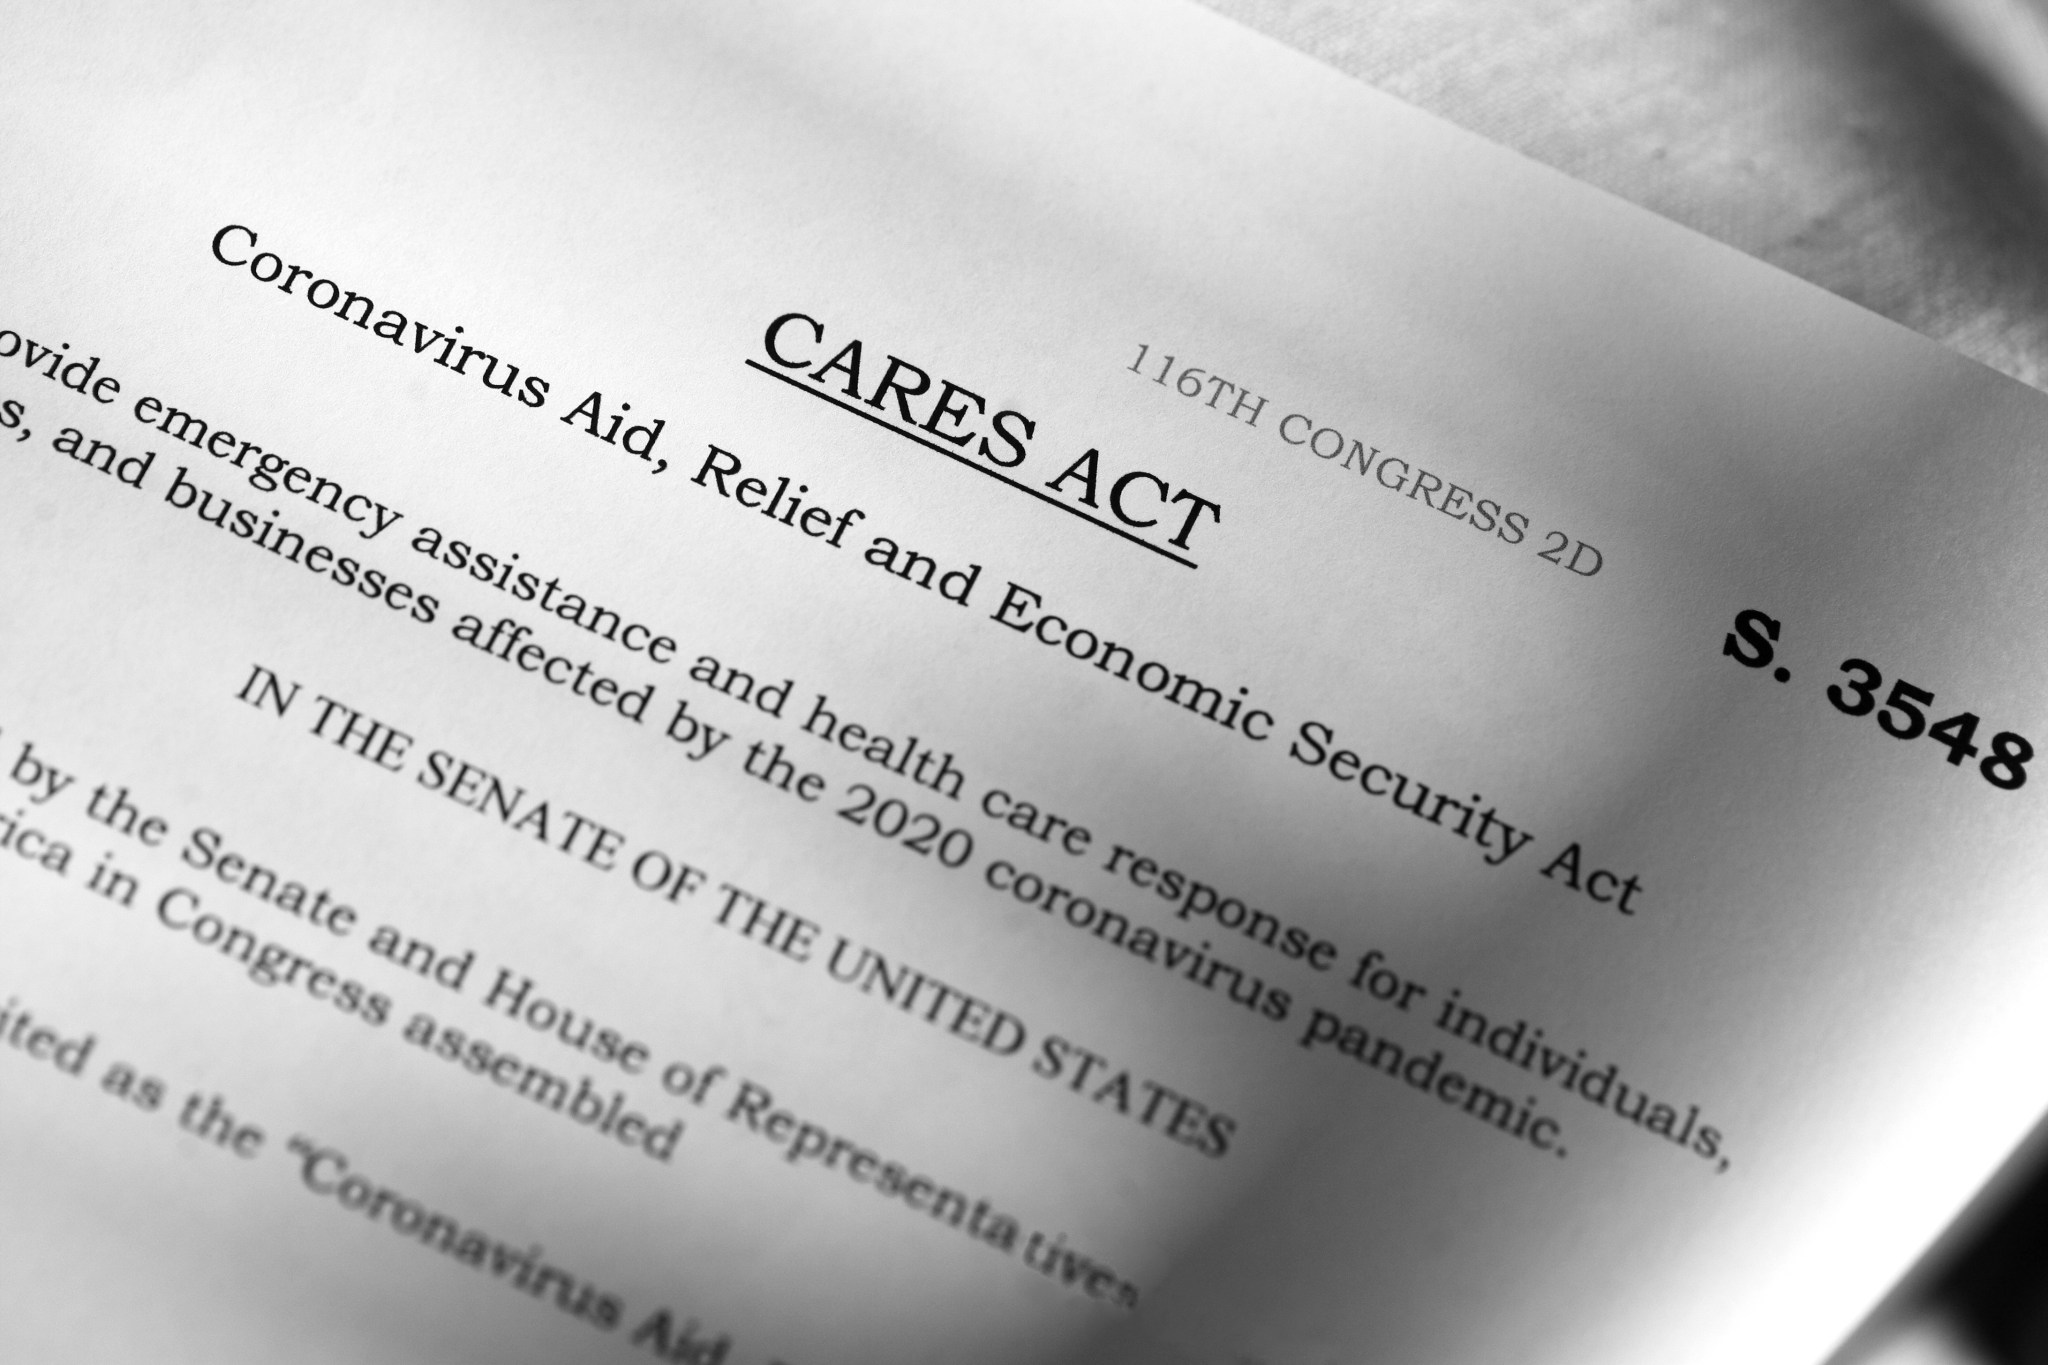 simulated image of the 2020 CARES Act